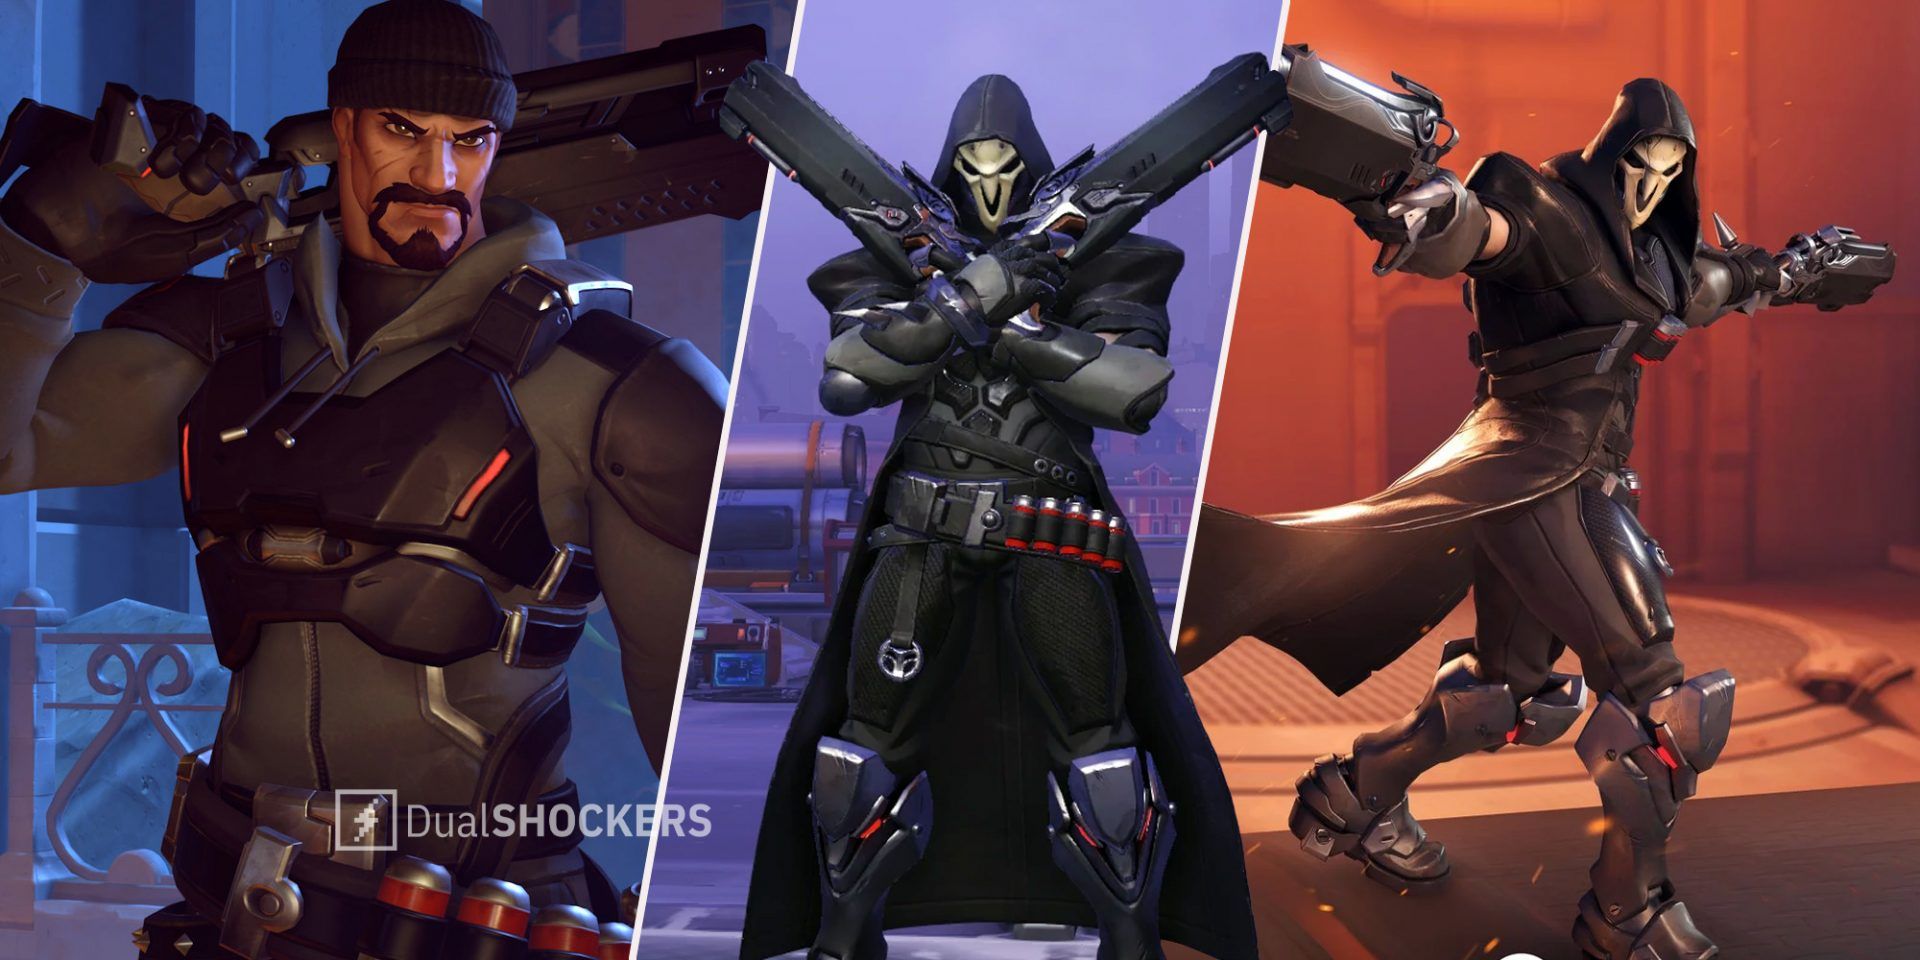 Overwatch Reaper Reyes on left, Reaper with double guns in middle, Reaper using his Death Blossom ultimate